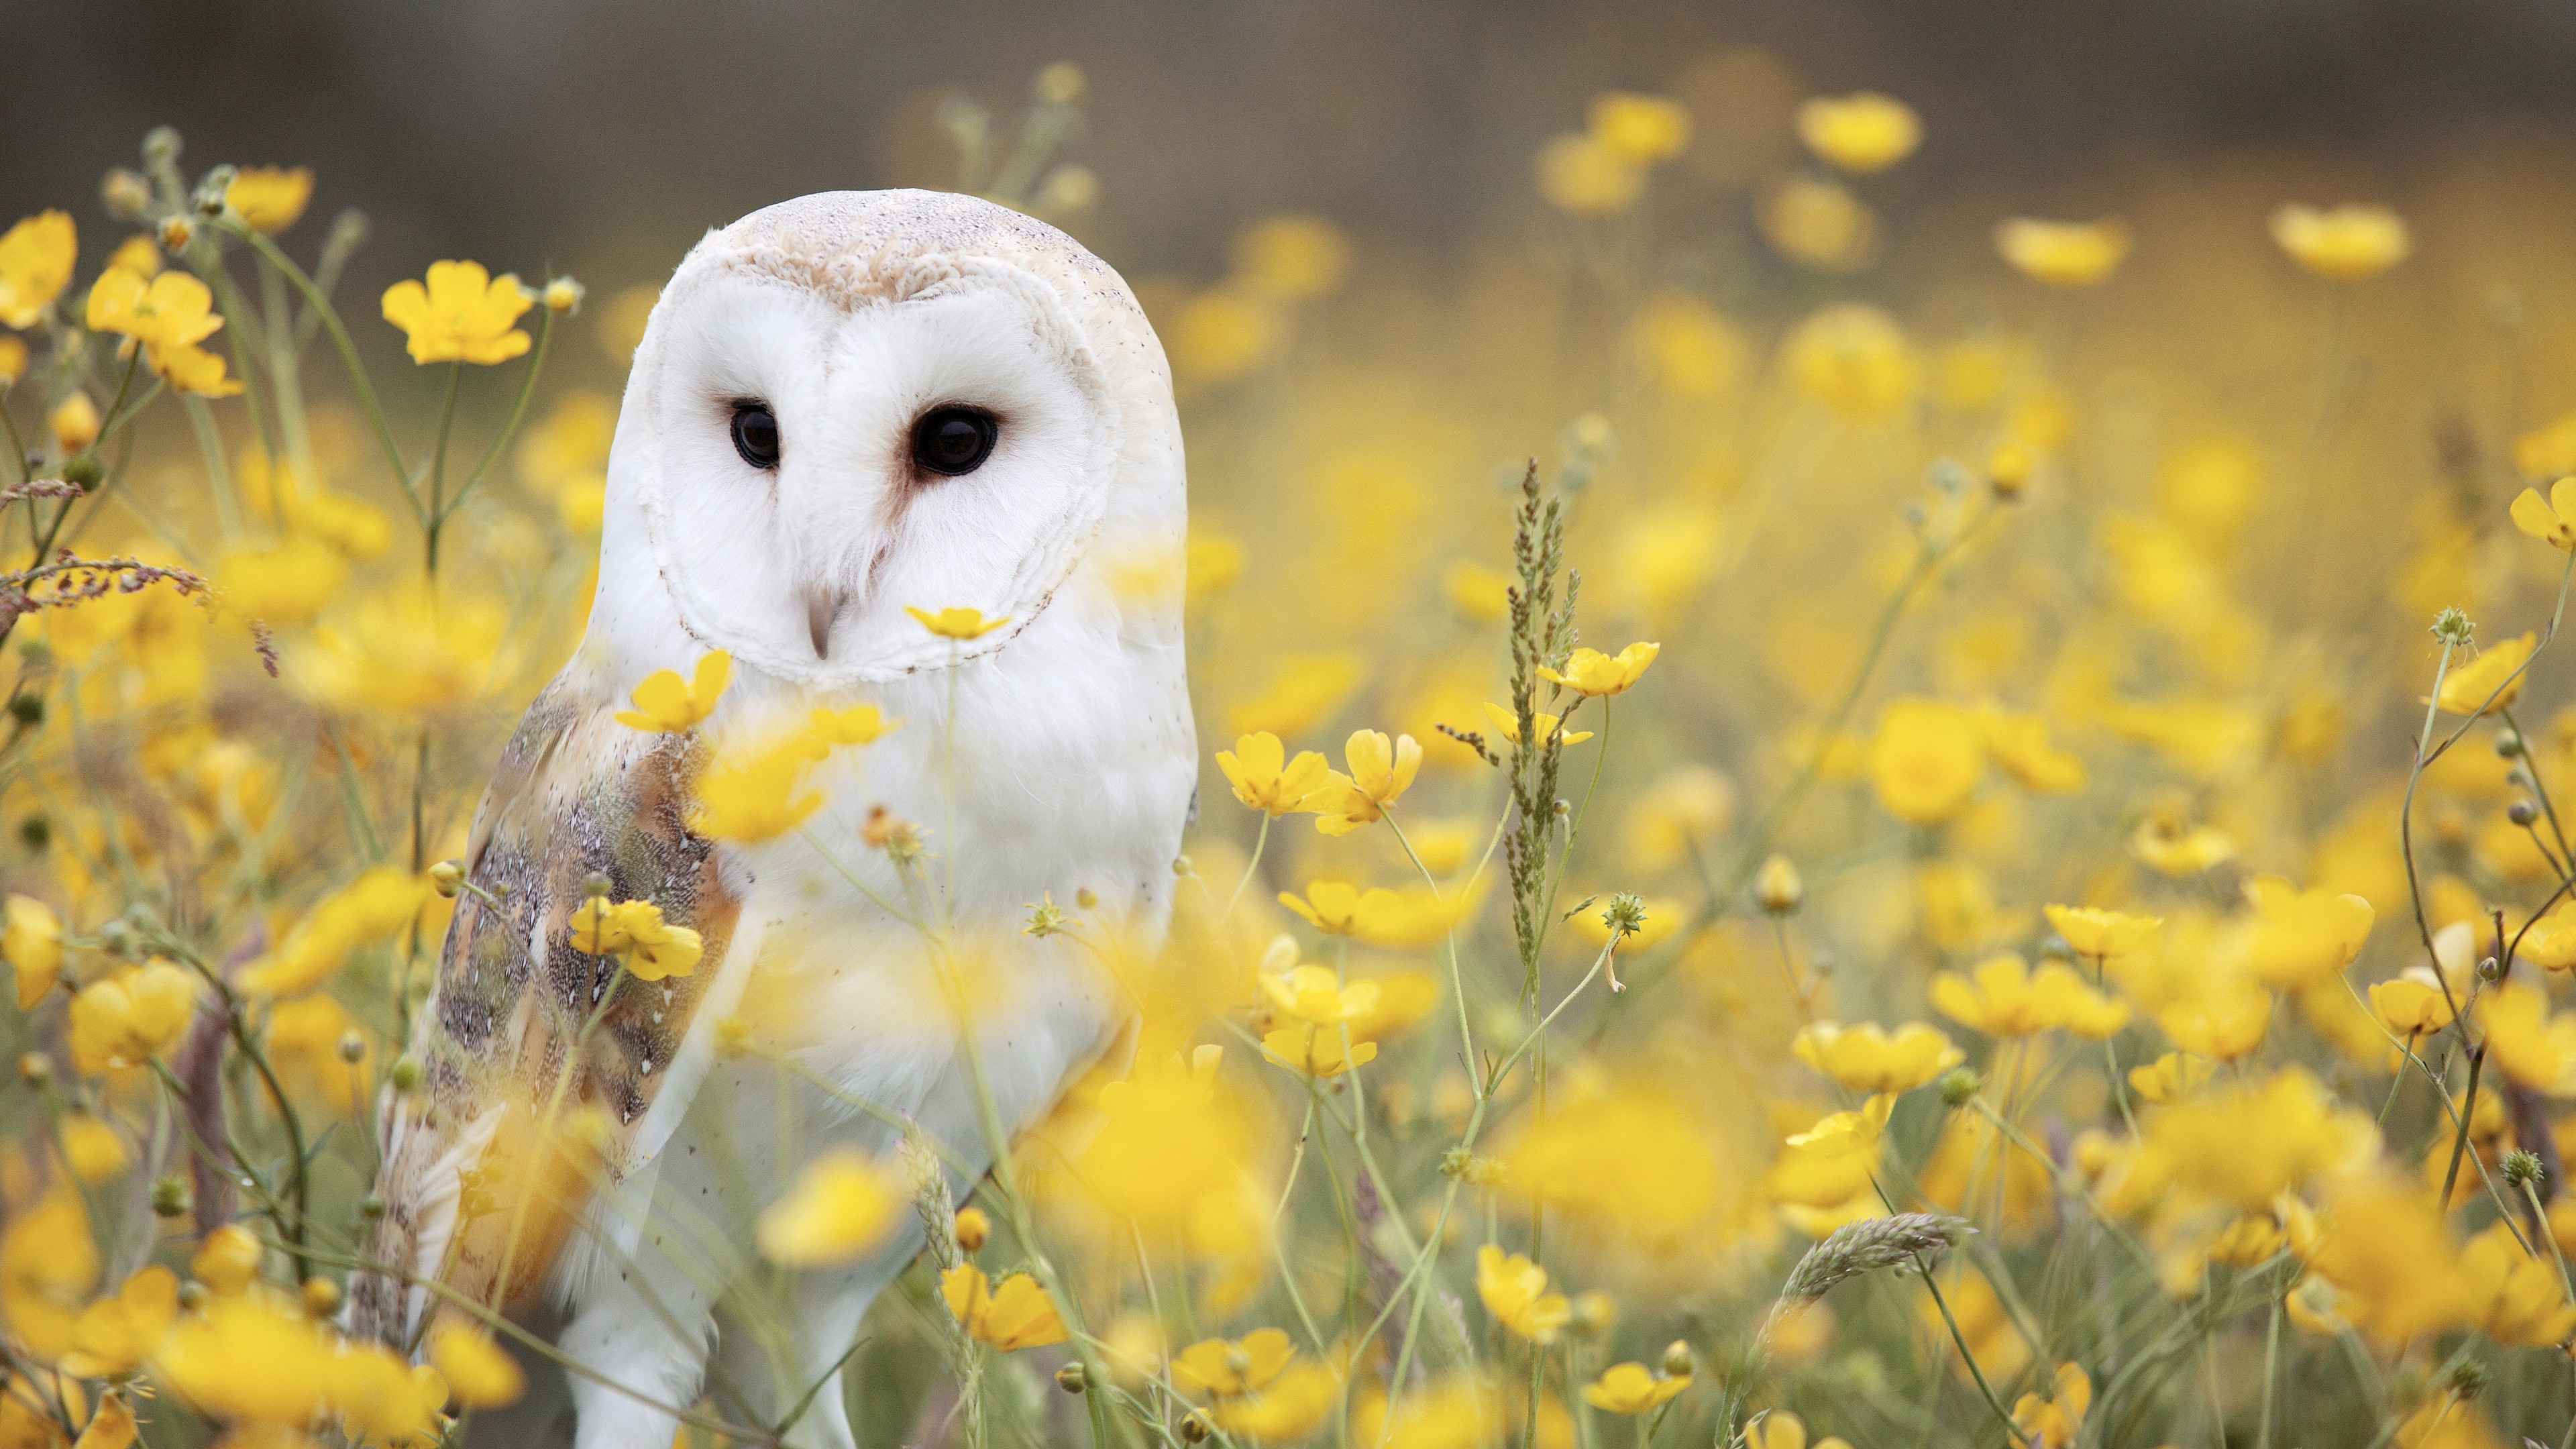 Owl-wallpaper 884402 - Barn Owl Wallpaper Hd , HD Wallpaper & Backgrounds